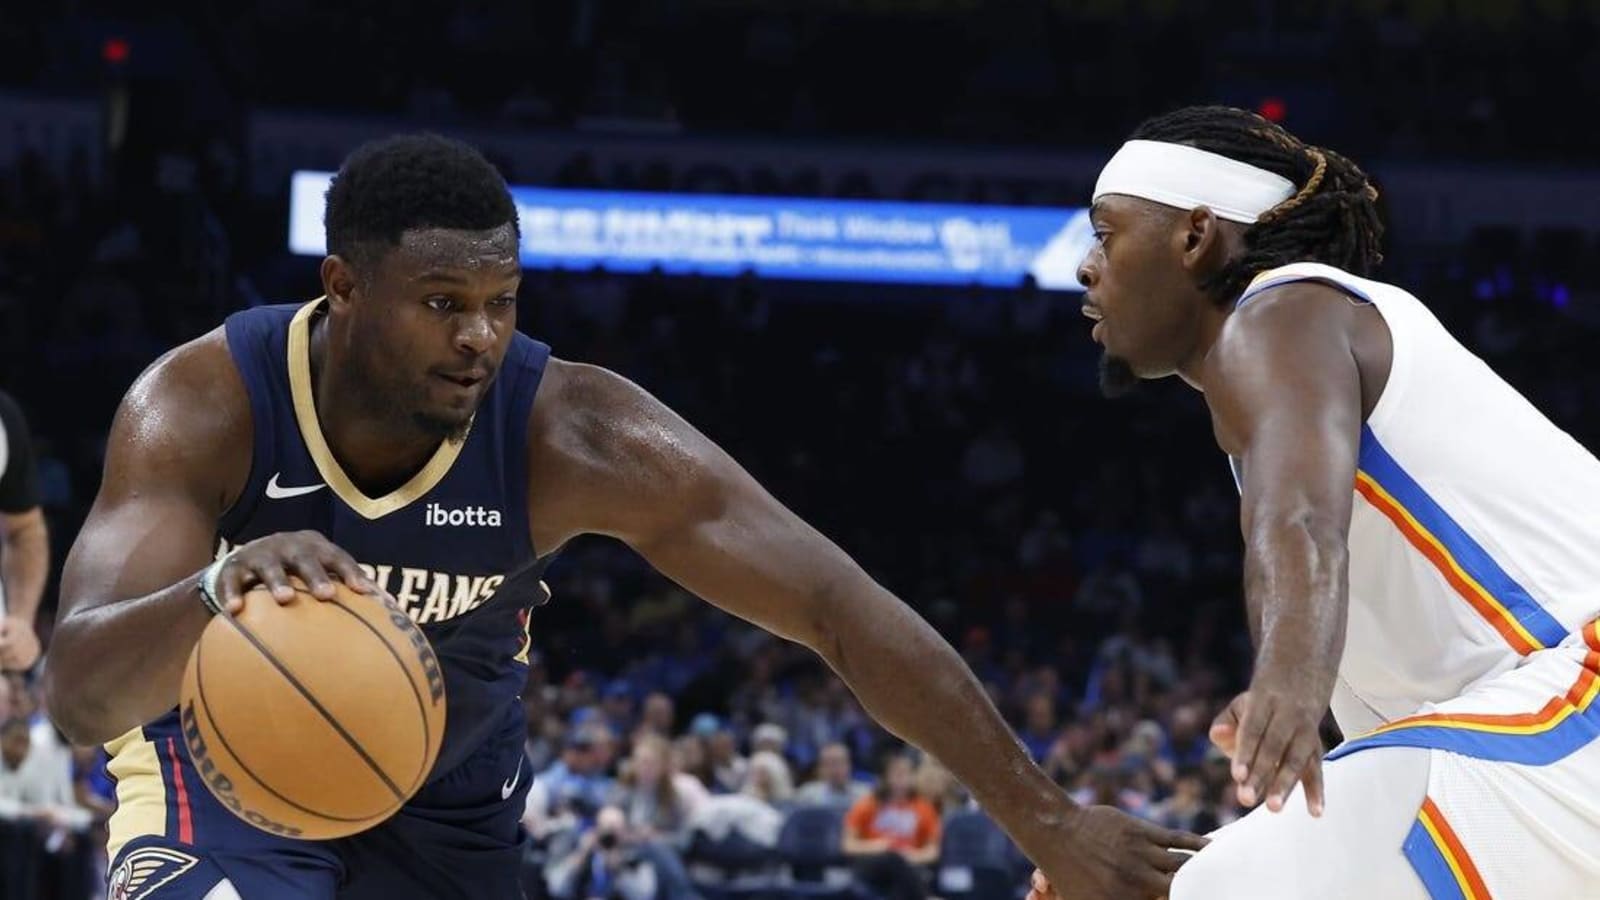 Pelicans F Zion Williamson out for rest vs. Pistons